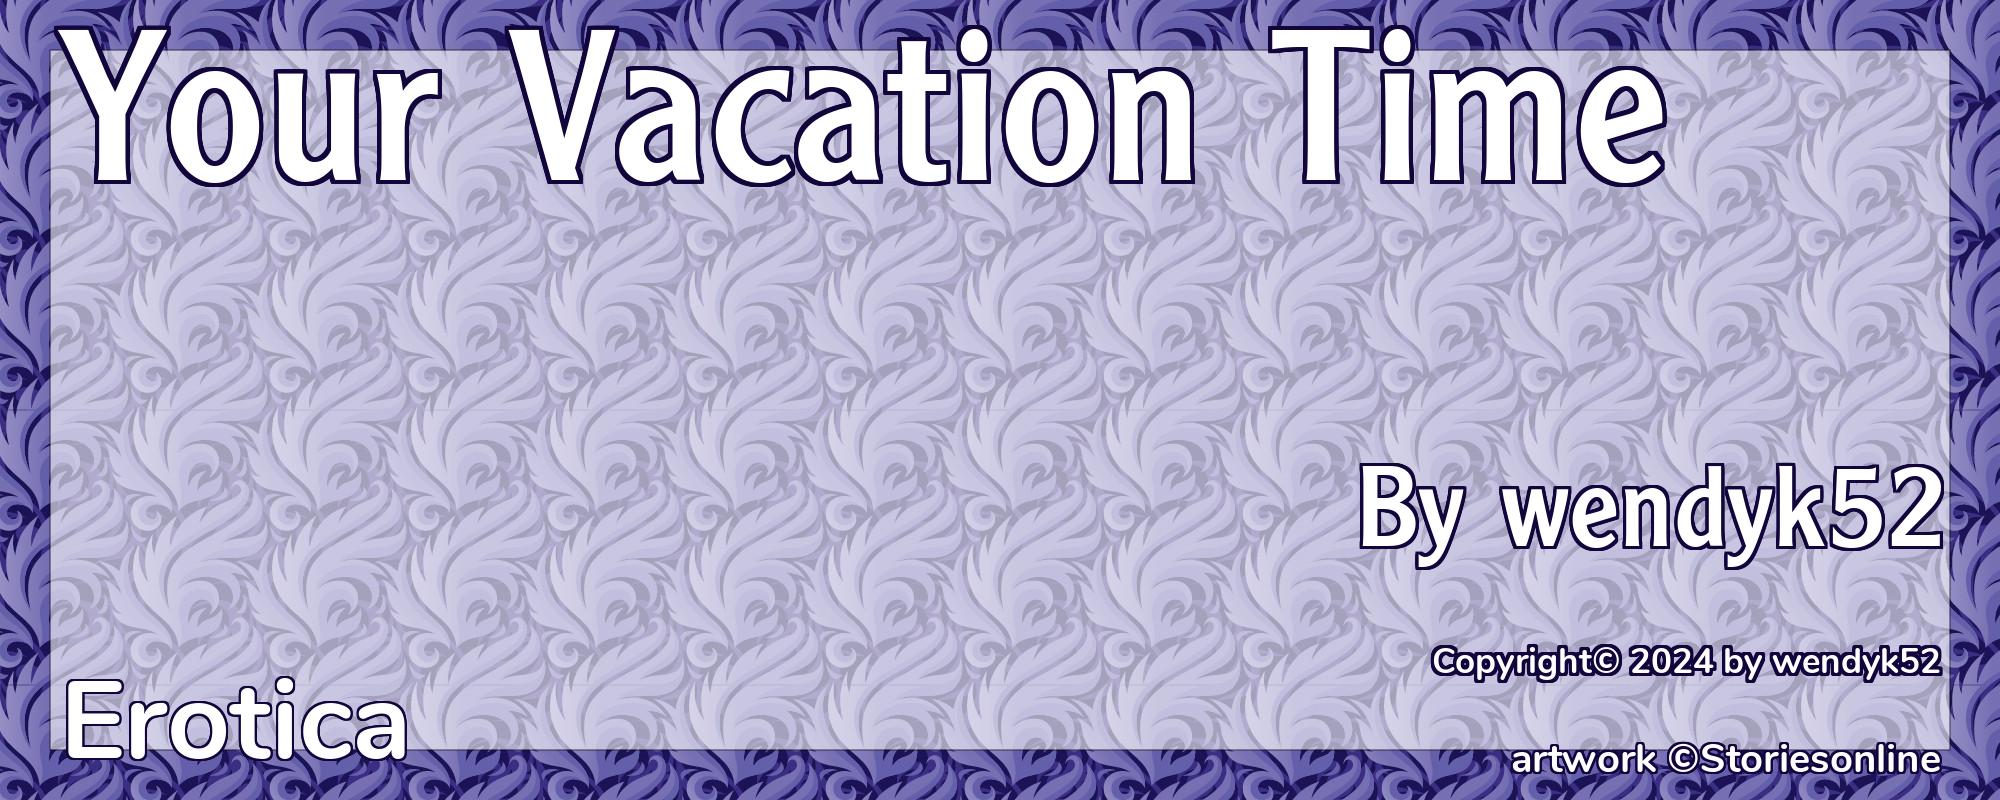 Your Vacation Time - Cover